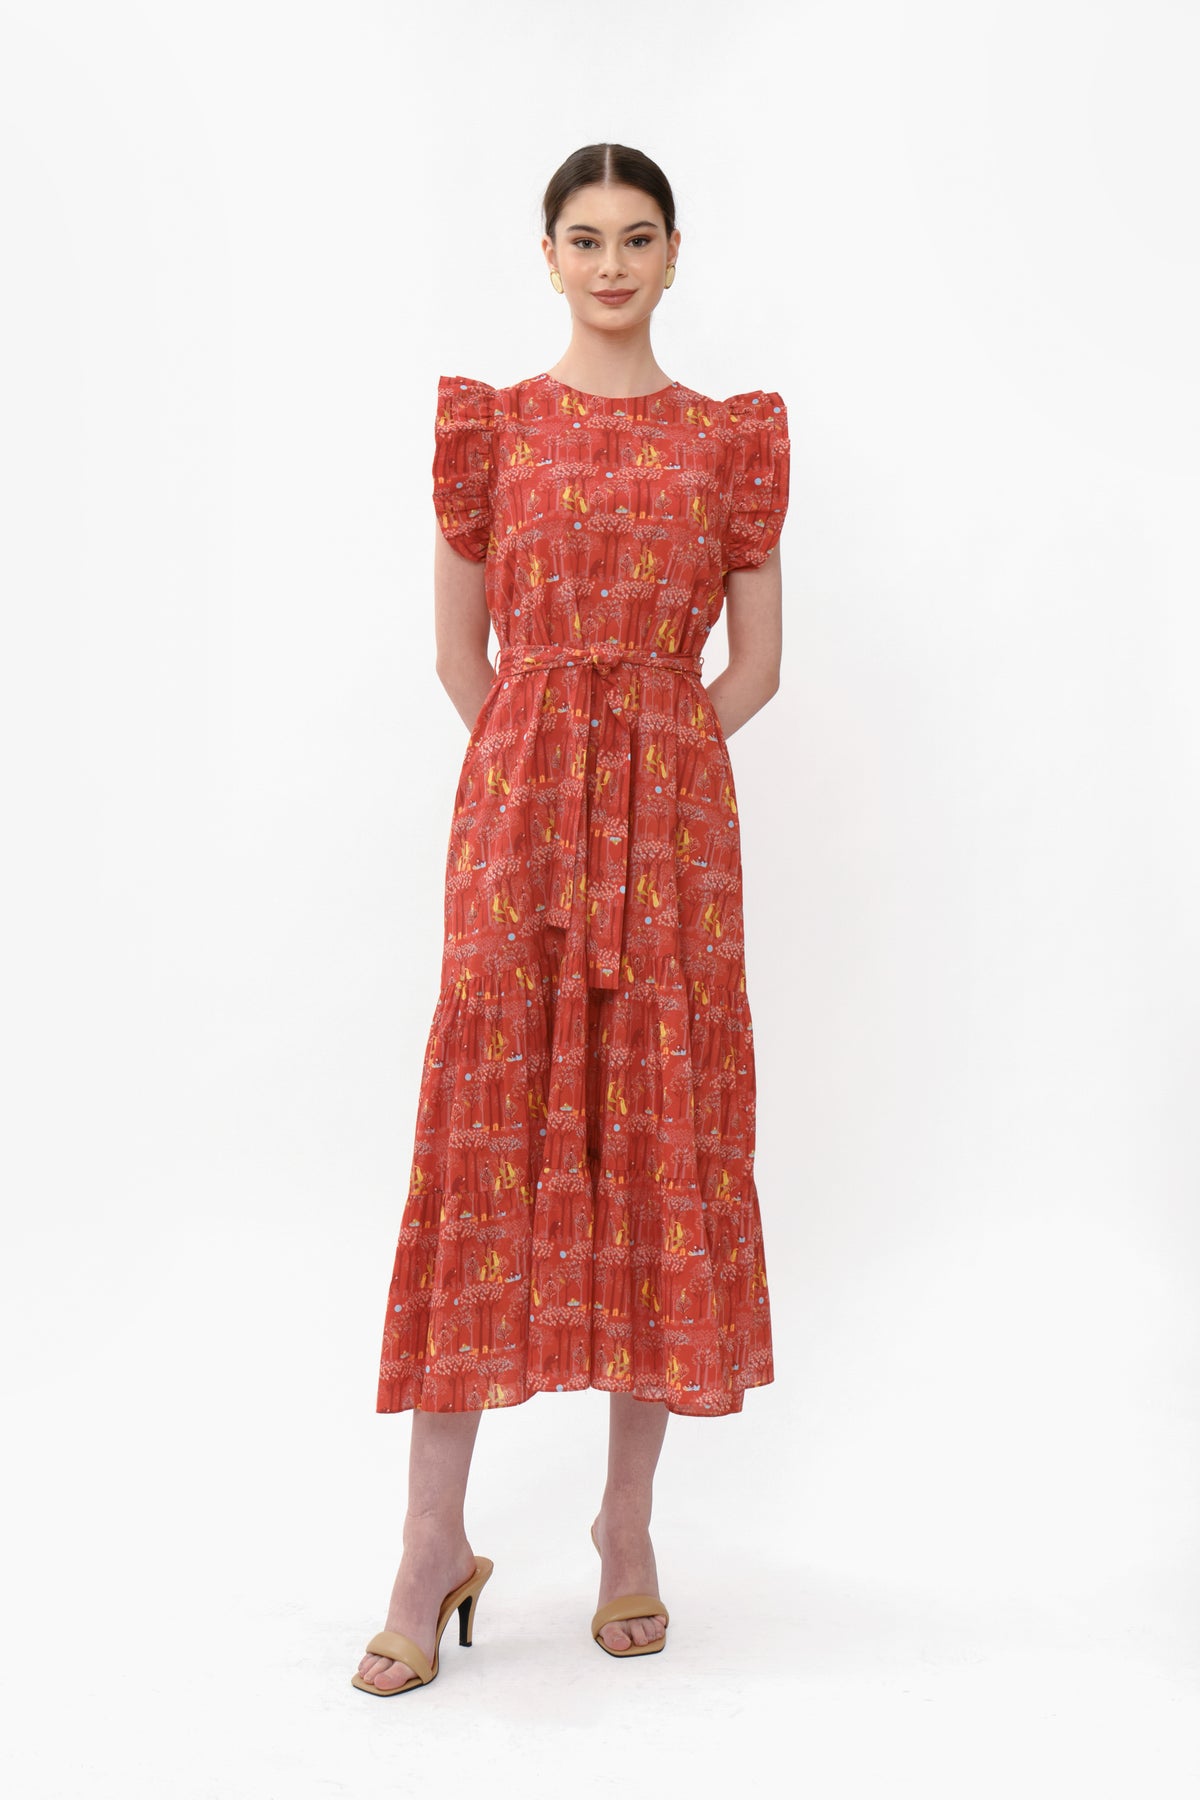 LEXI Dress in Red Forest